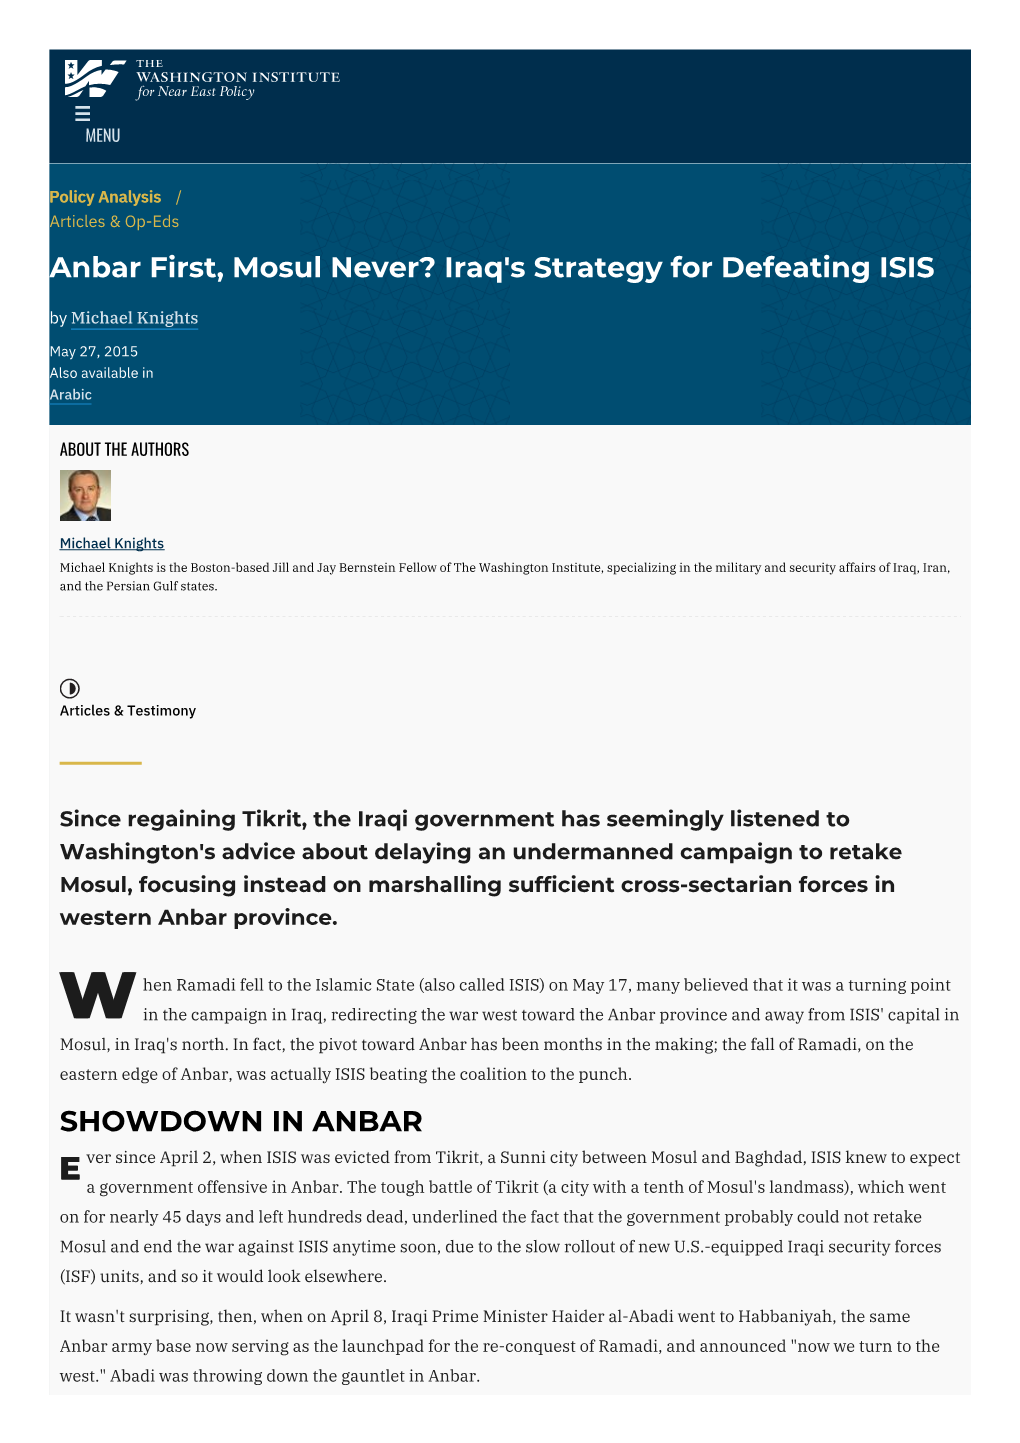 Anbar First, Mosul Never? Iraq's Strategy for Defeating ISIS by Michael Knights